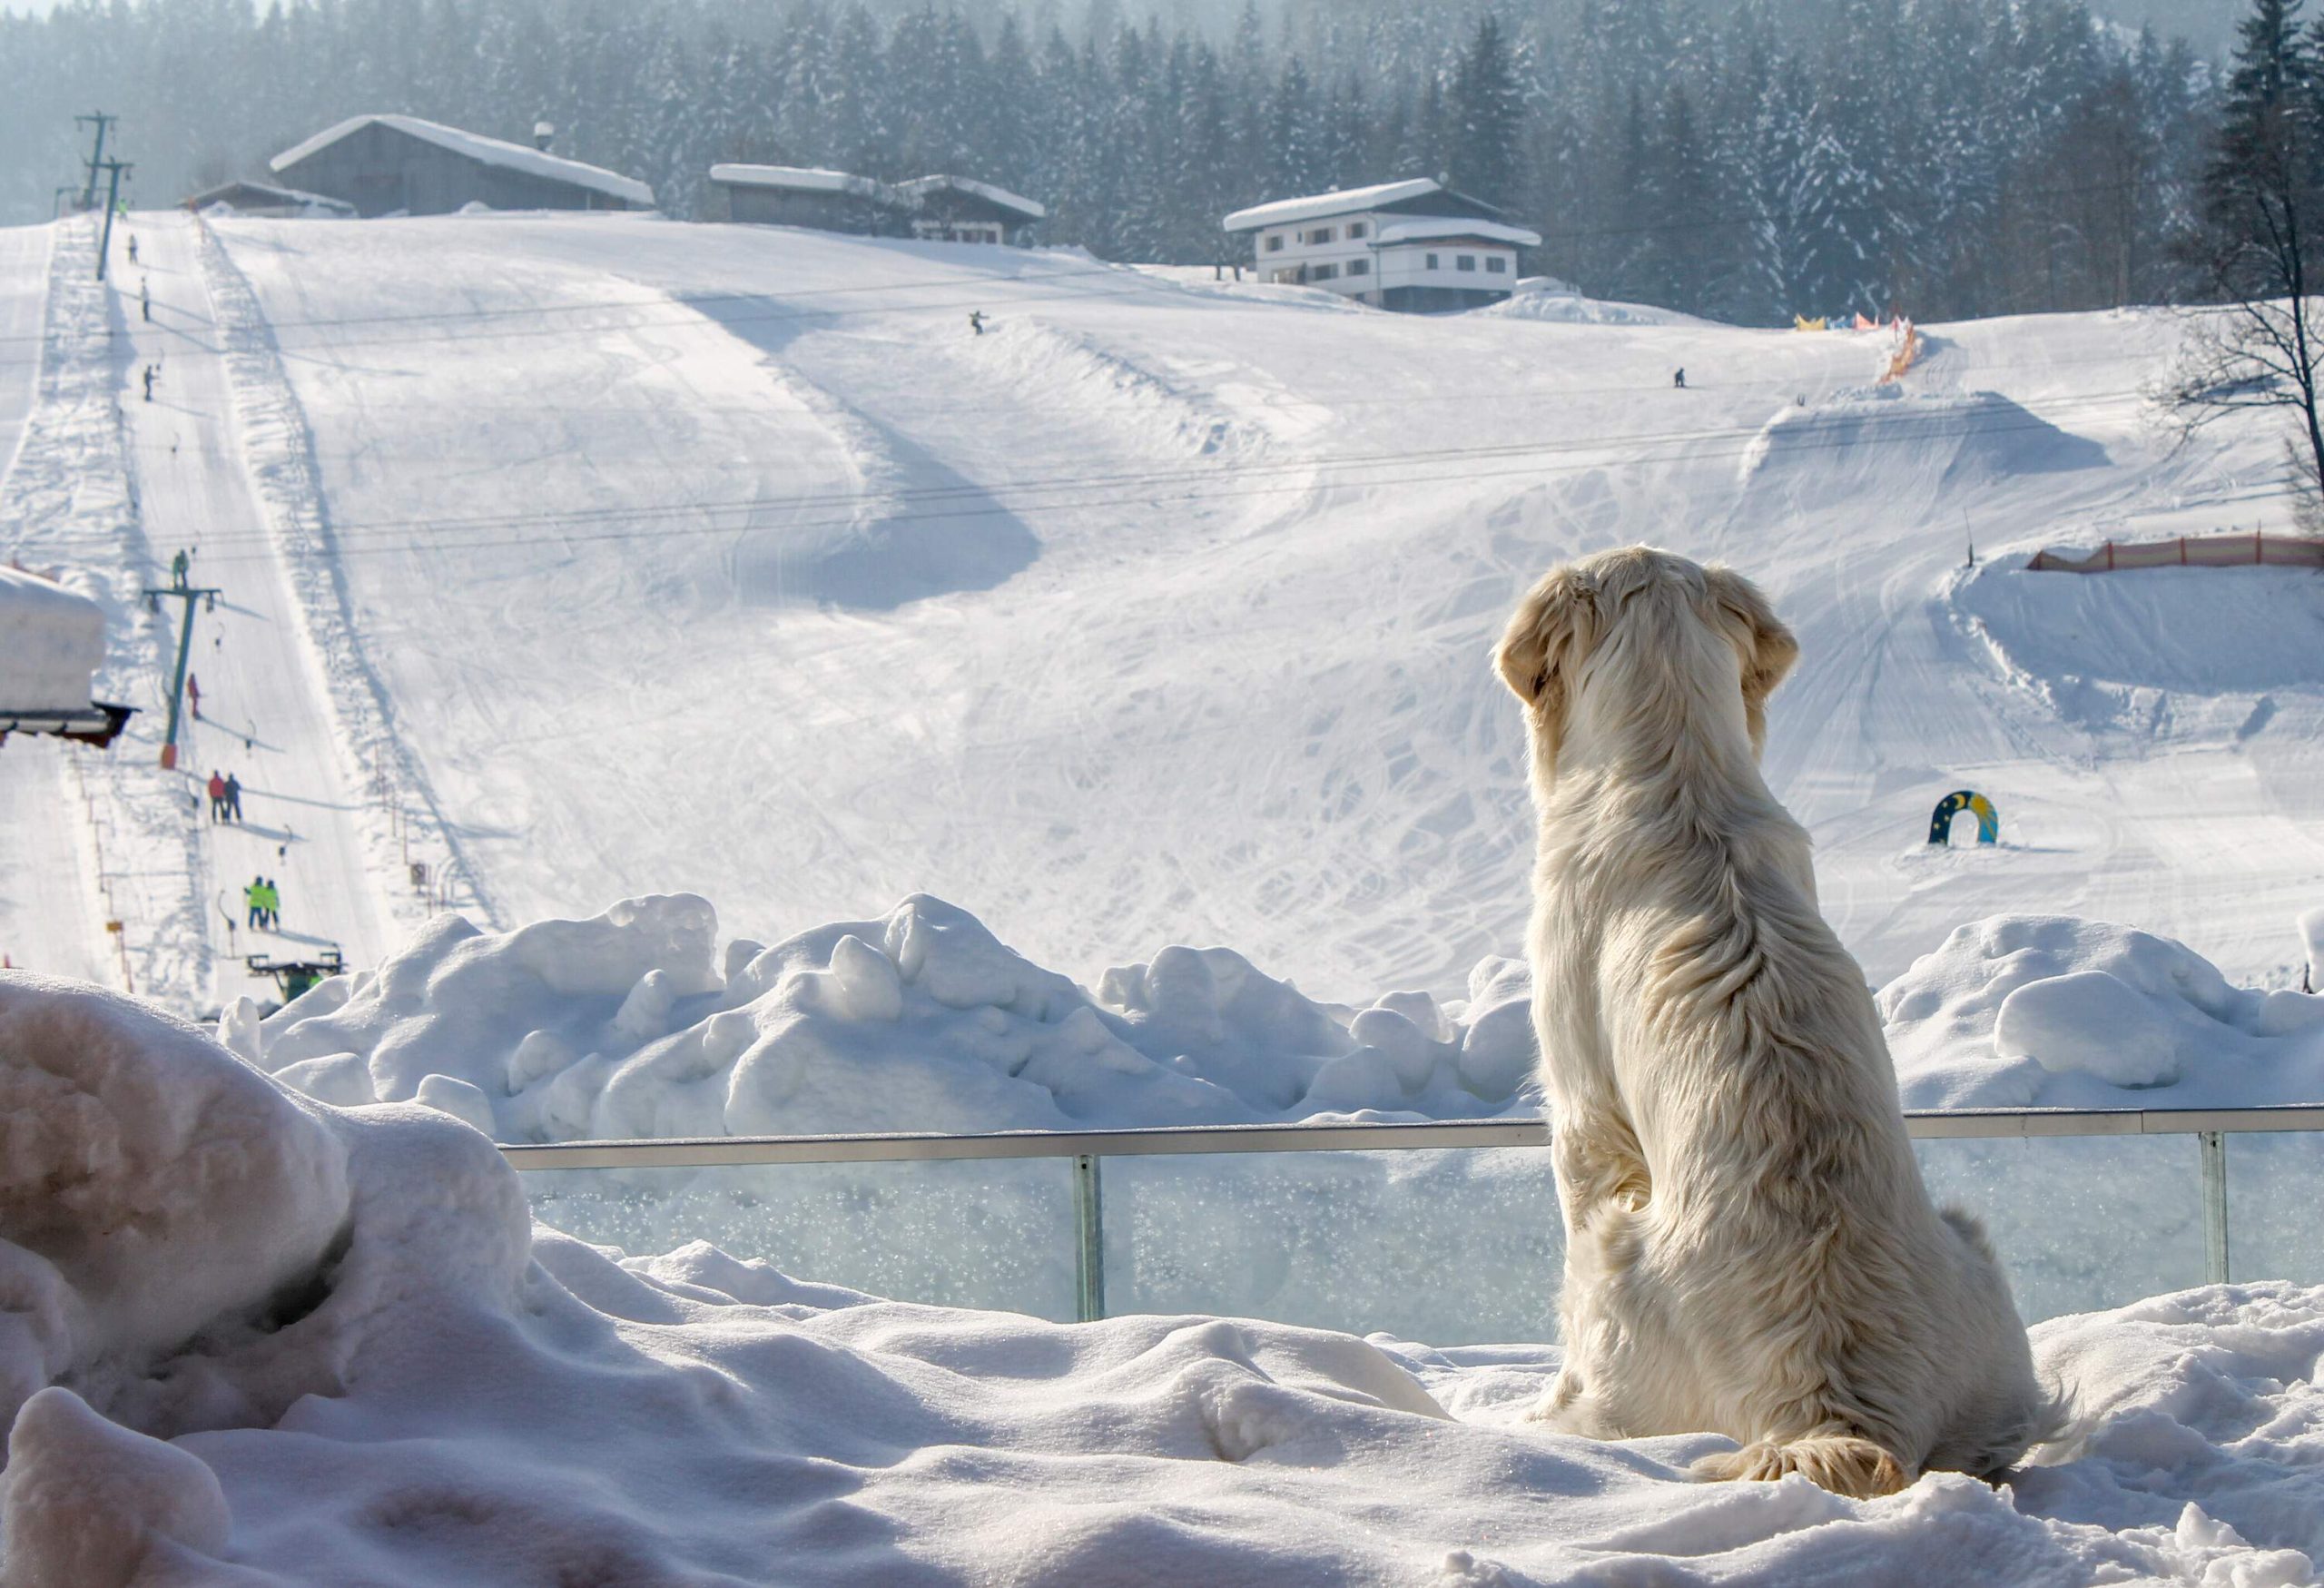 white dog enjoys looking at the ski slope in winter